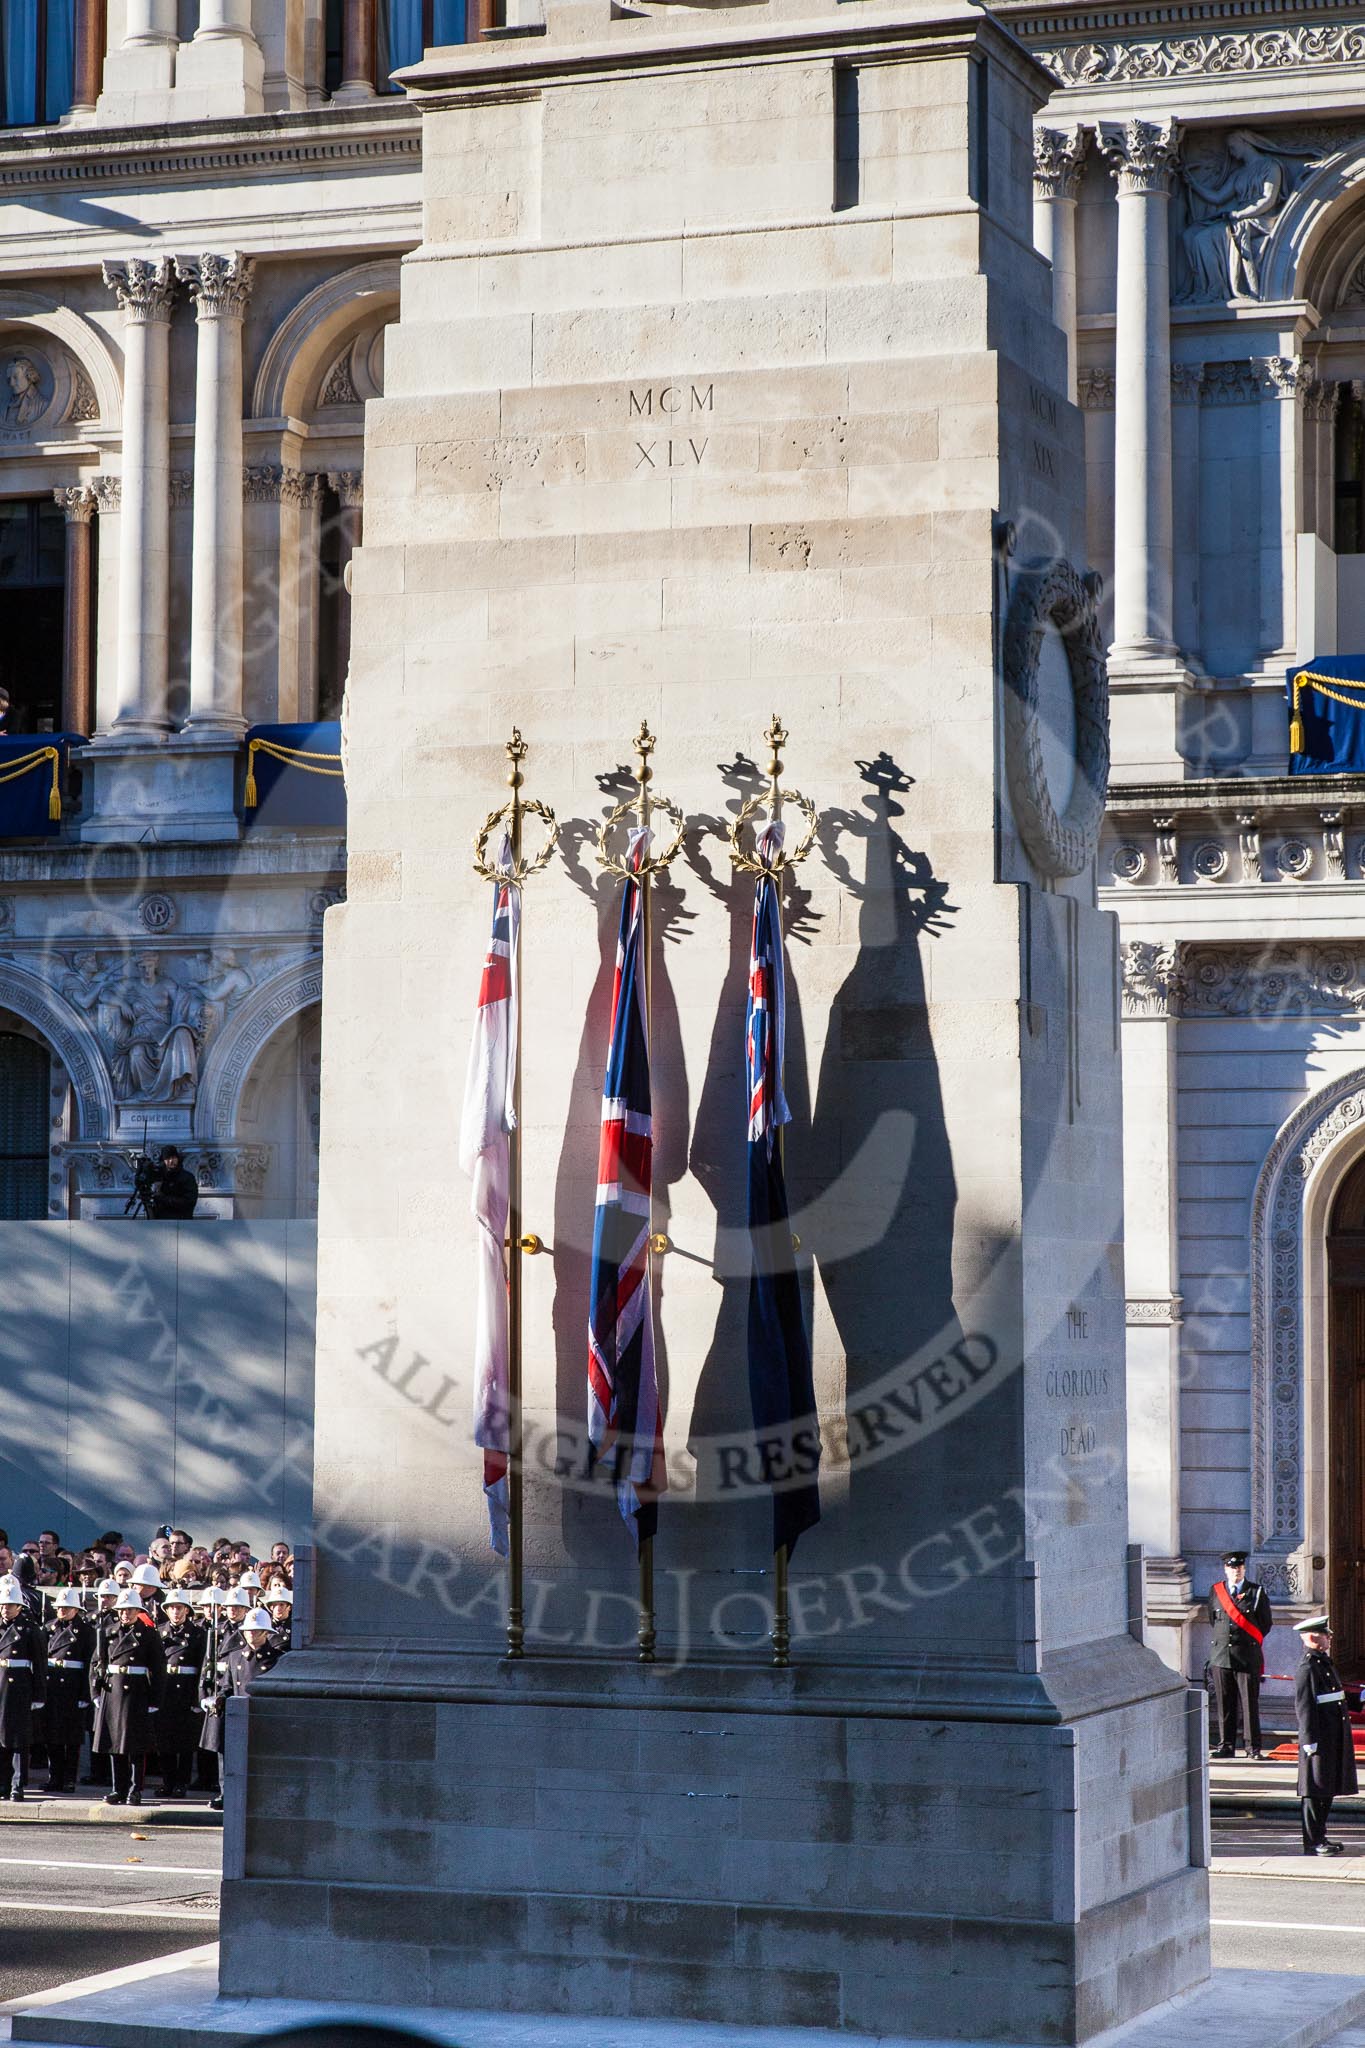 The Cenotaph in the morning sun at 10:20am, minutes before the start of the Cenptaph Ceremony.